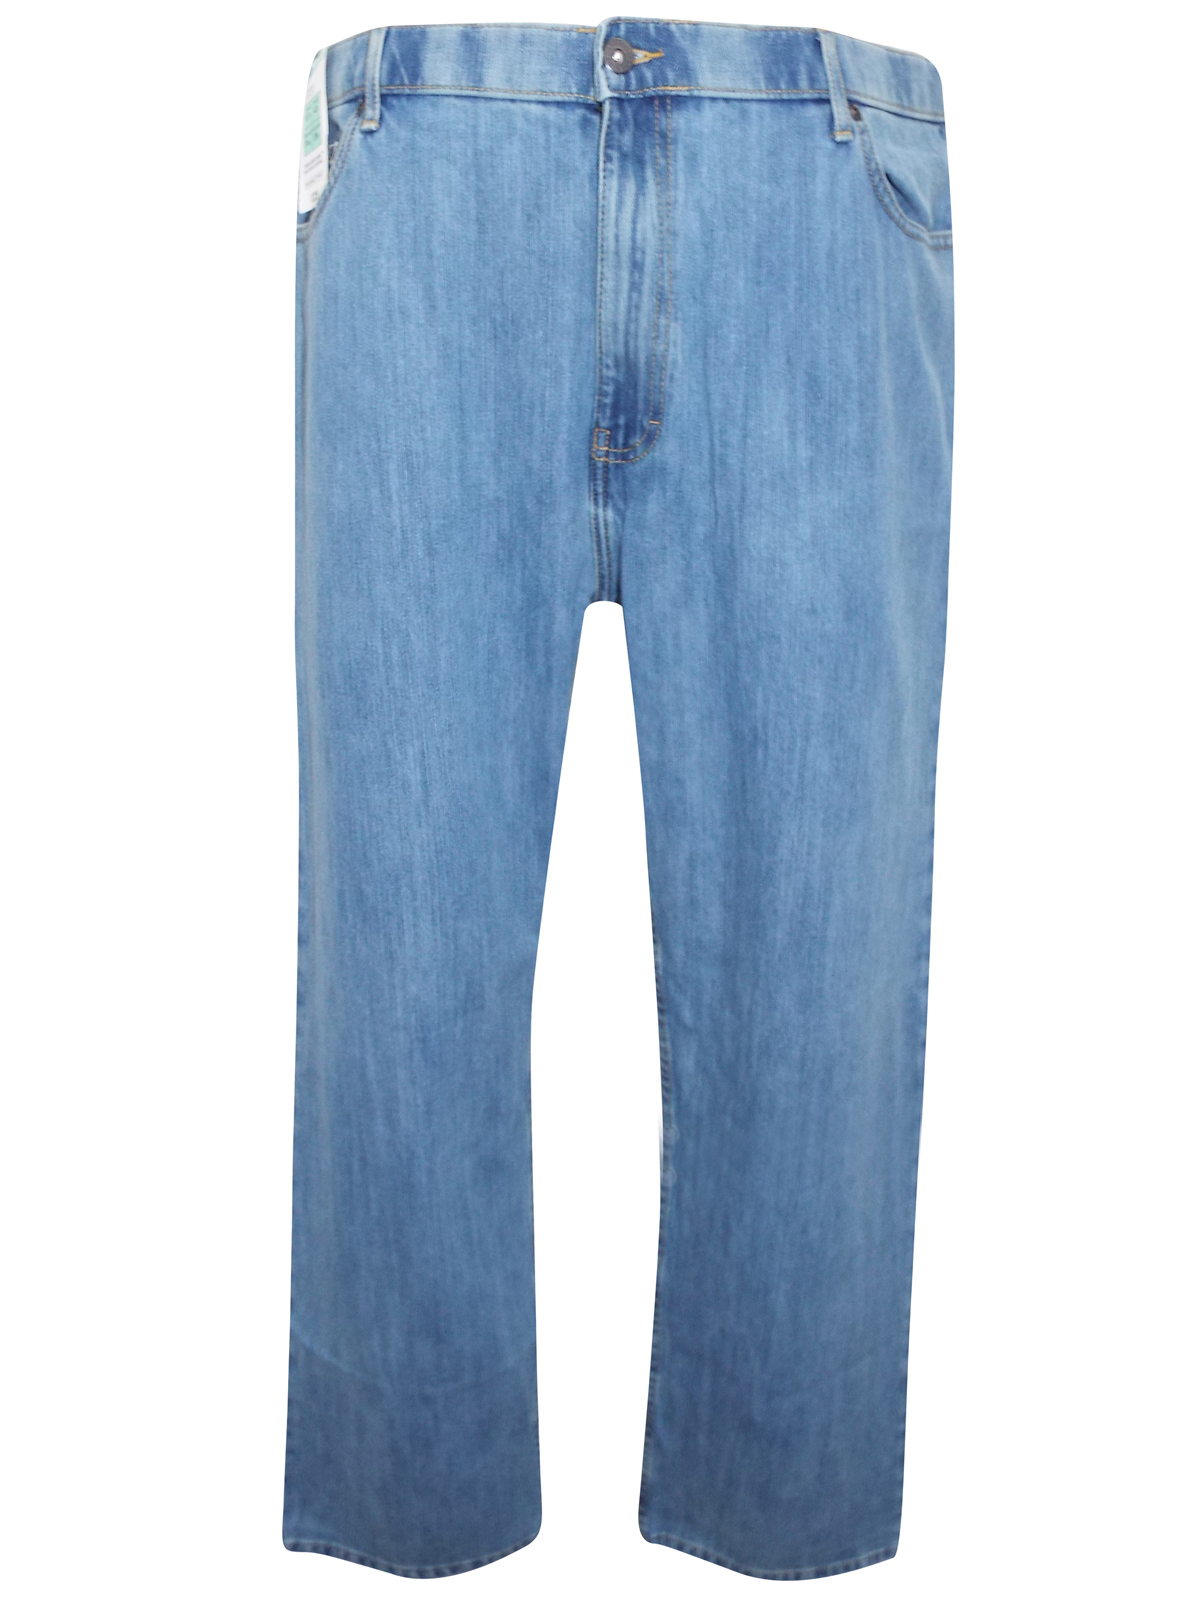 Marks and Spencer - - M&5 LIGHT-BLUE Regular Fit Stretch Jeans with ...